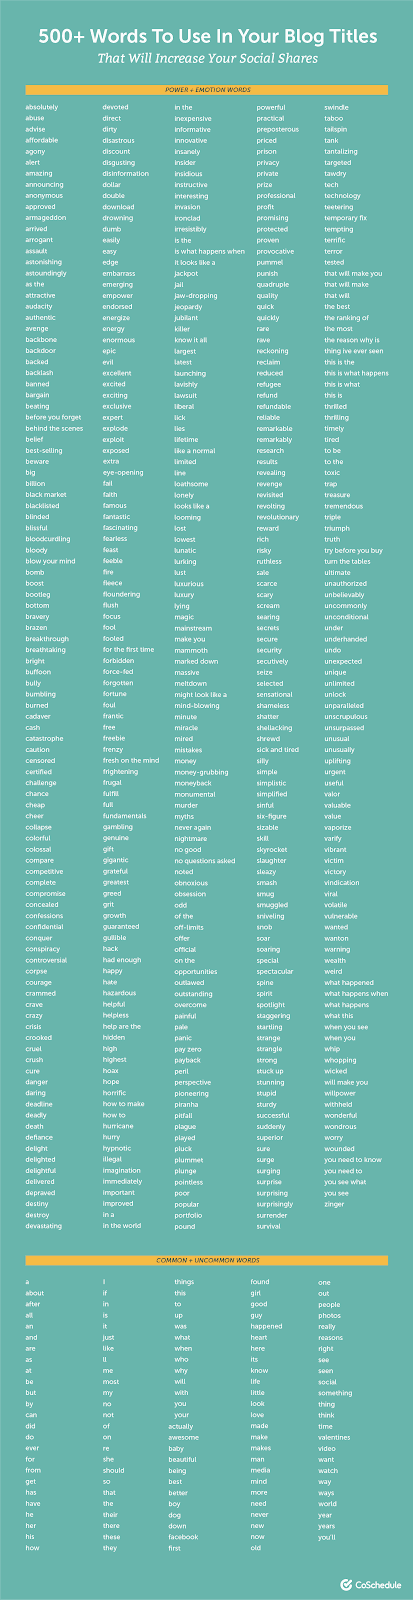 List of 500+ words to add to your headlines